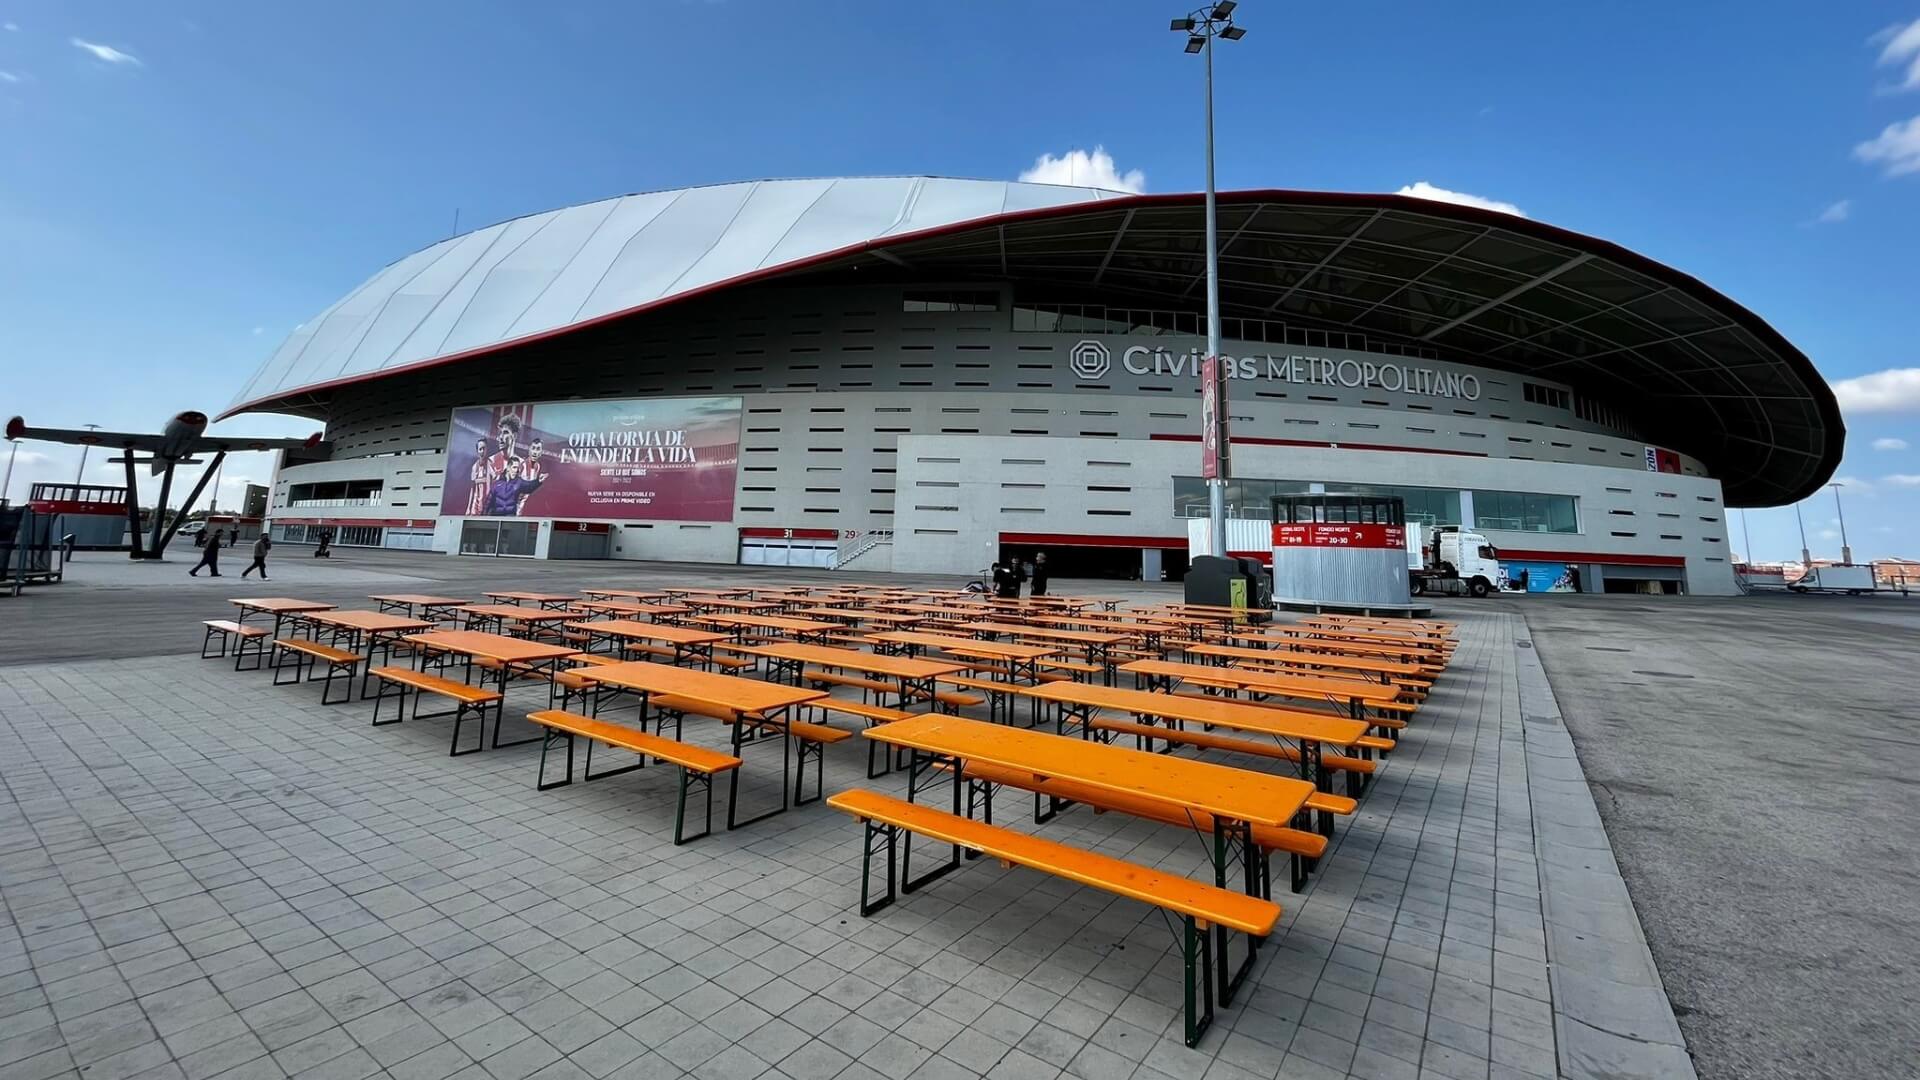 Classic beer garden table sets are set up in front of the Atletico de Madrid stadium.